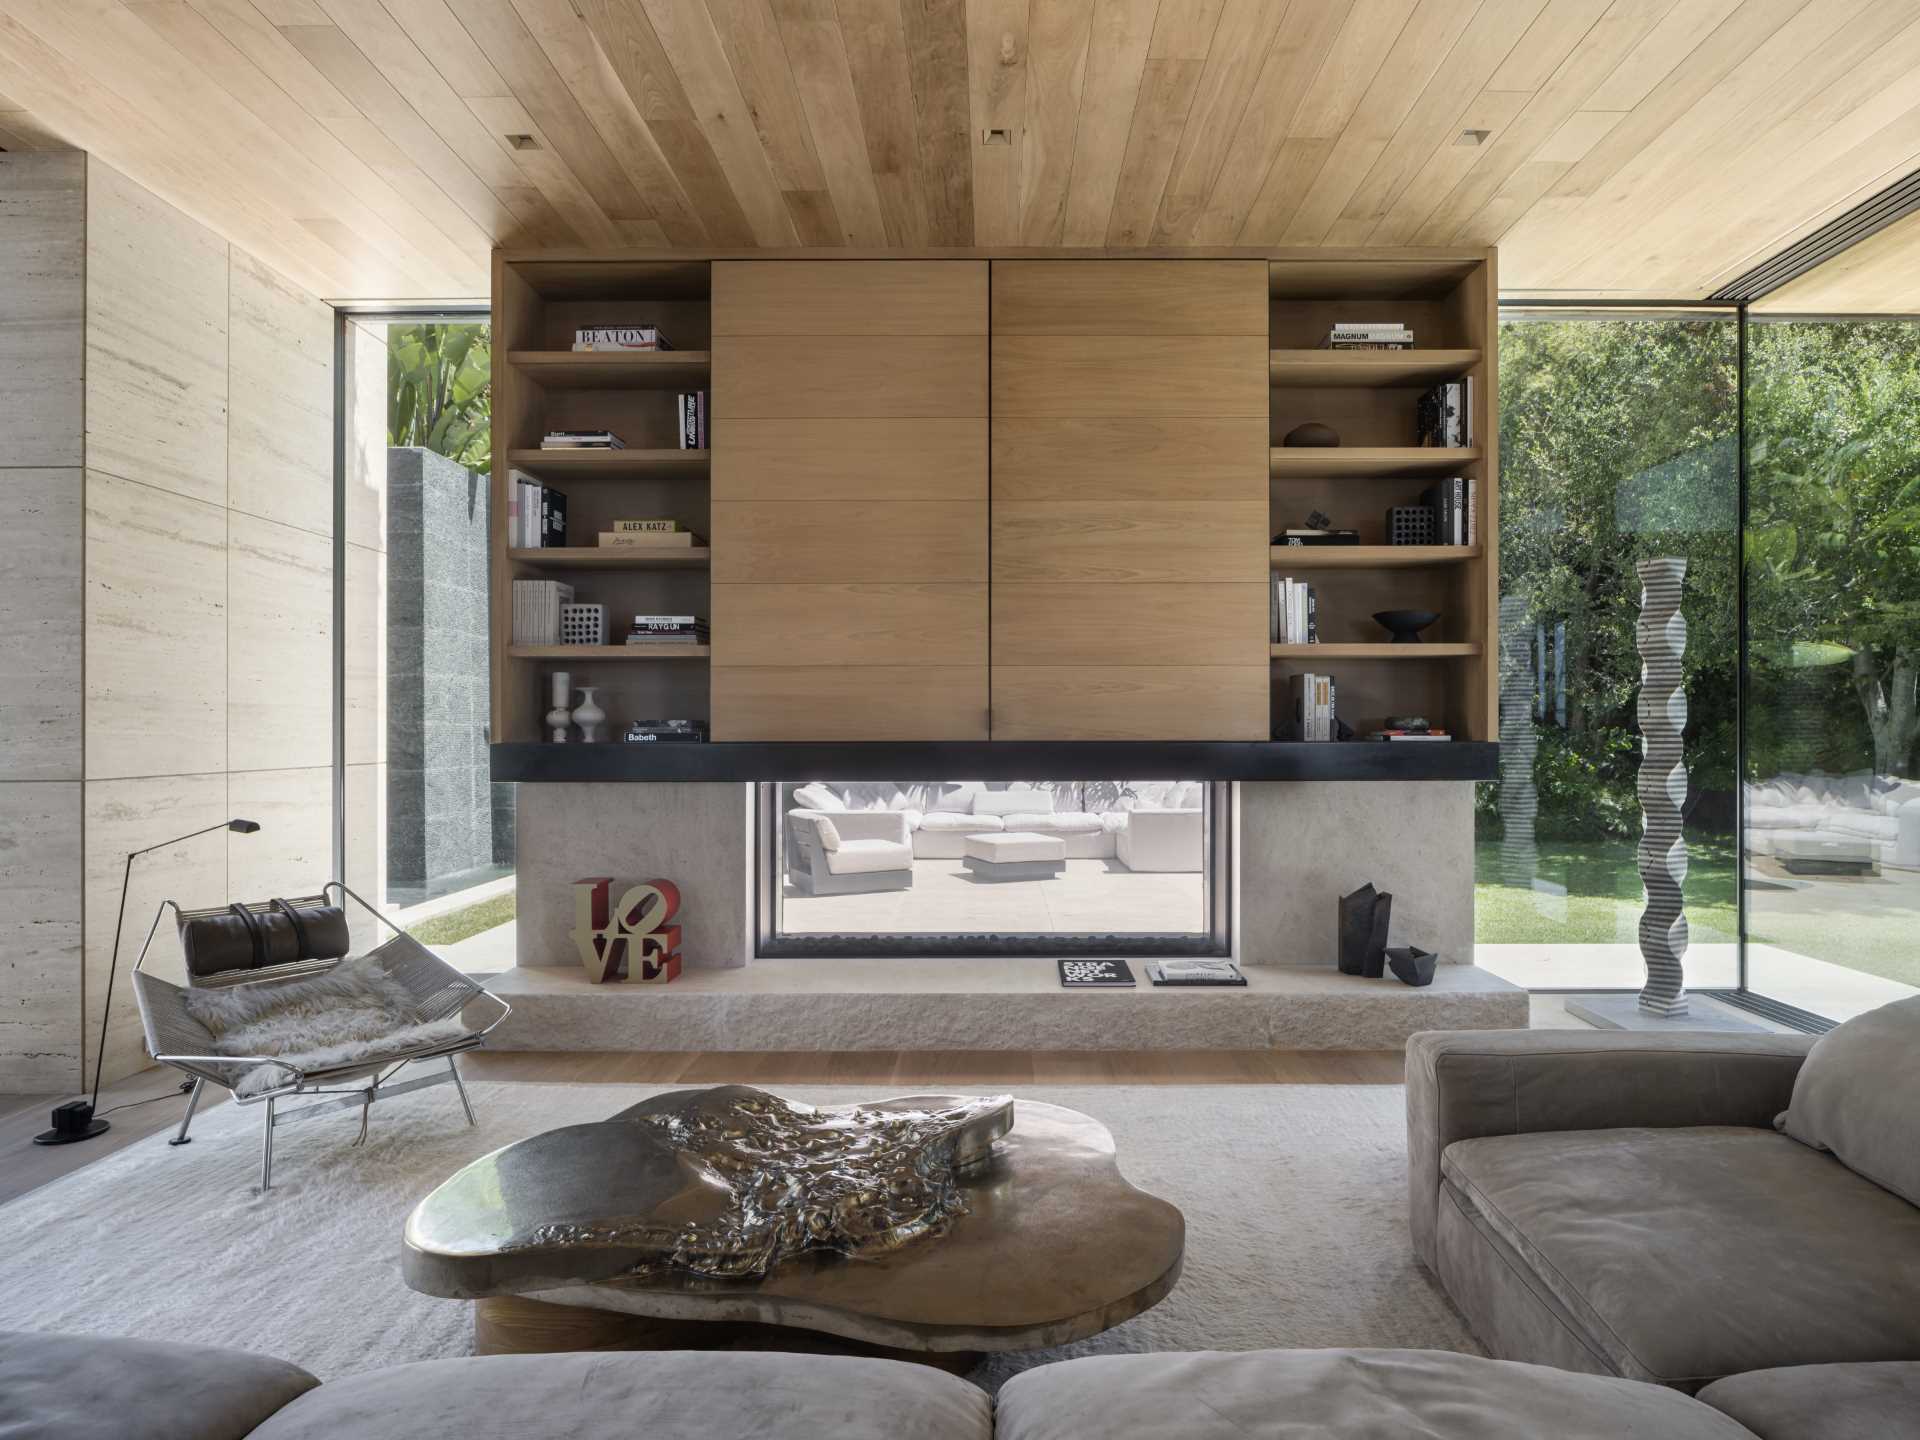 A living room with see-through fireplace with wood shelving above and floor-to-ceiling windows.